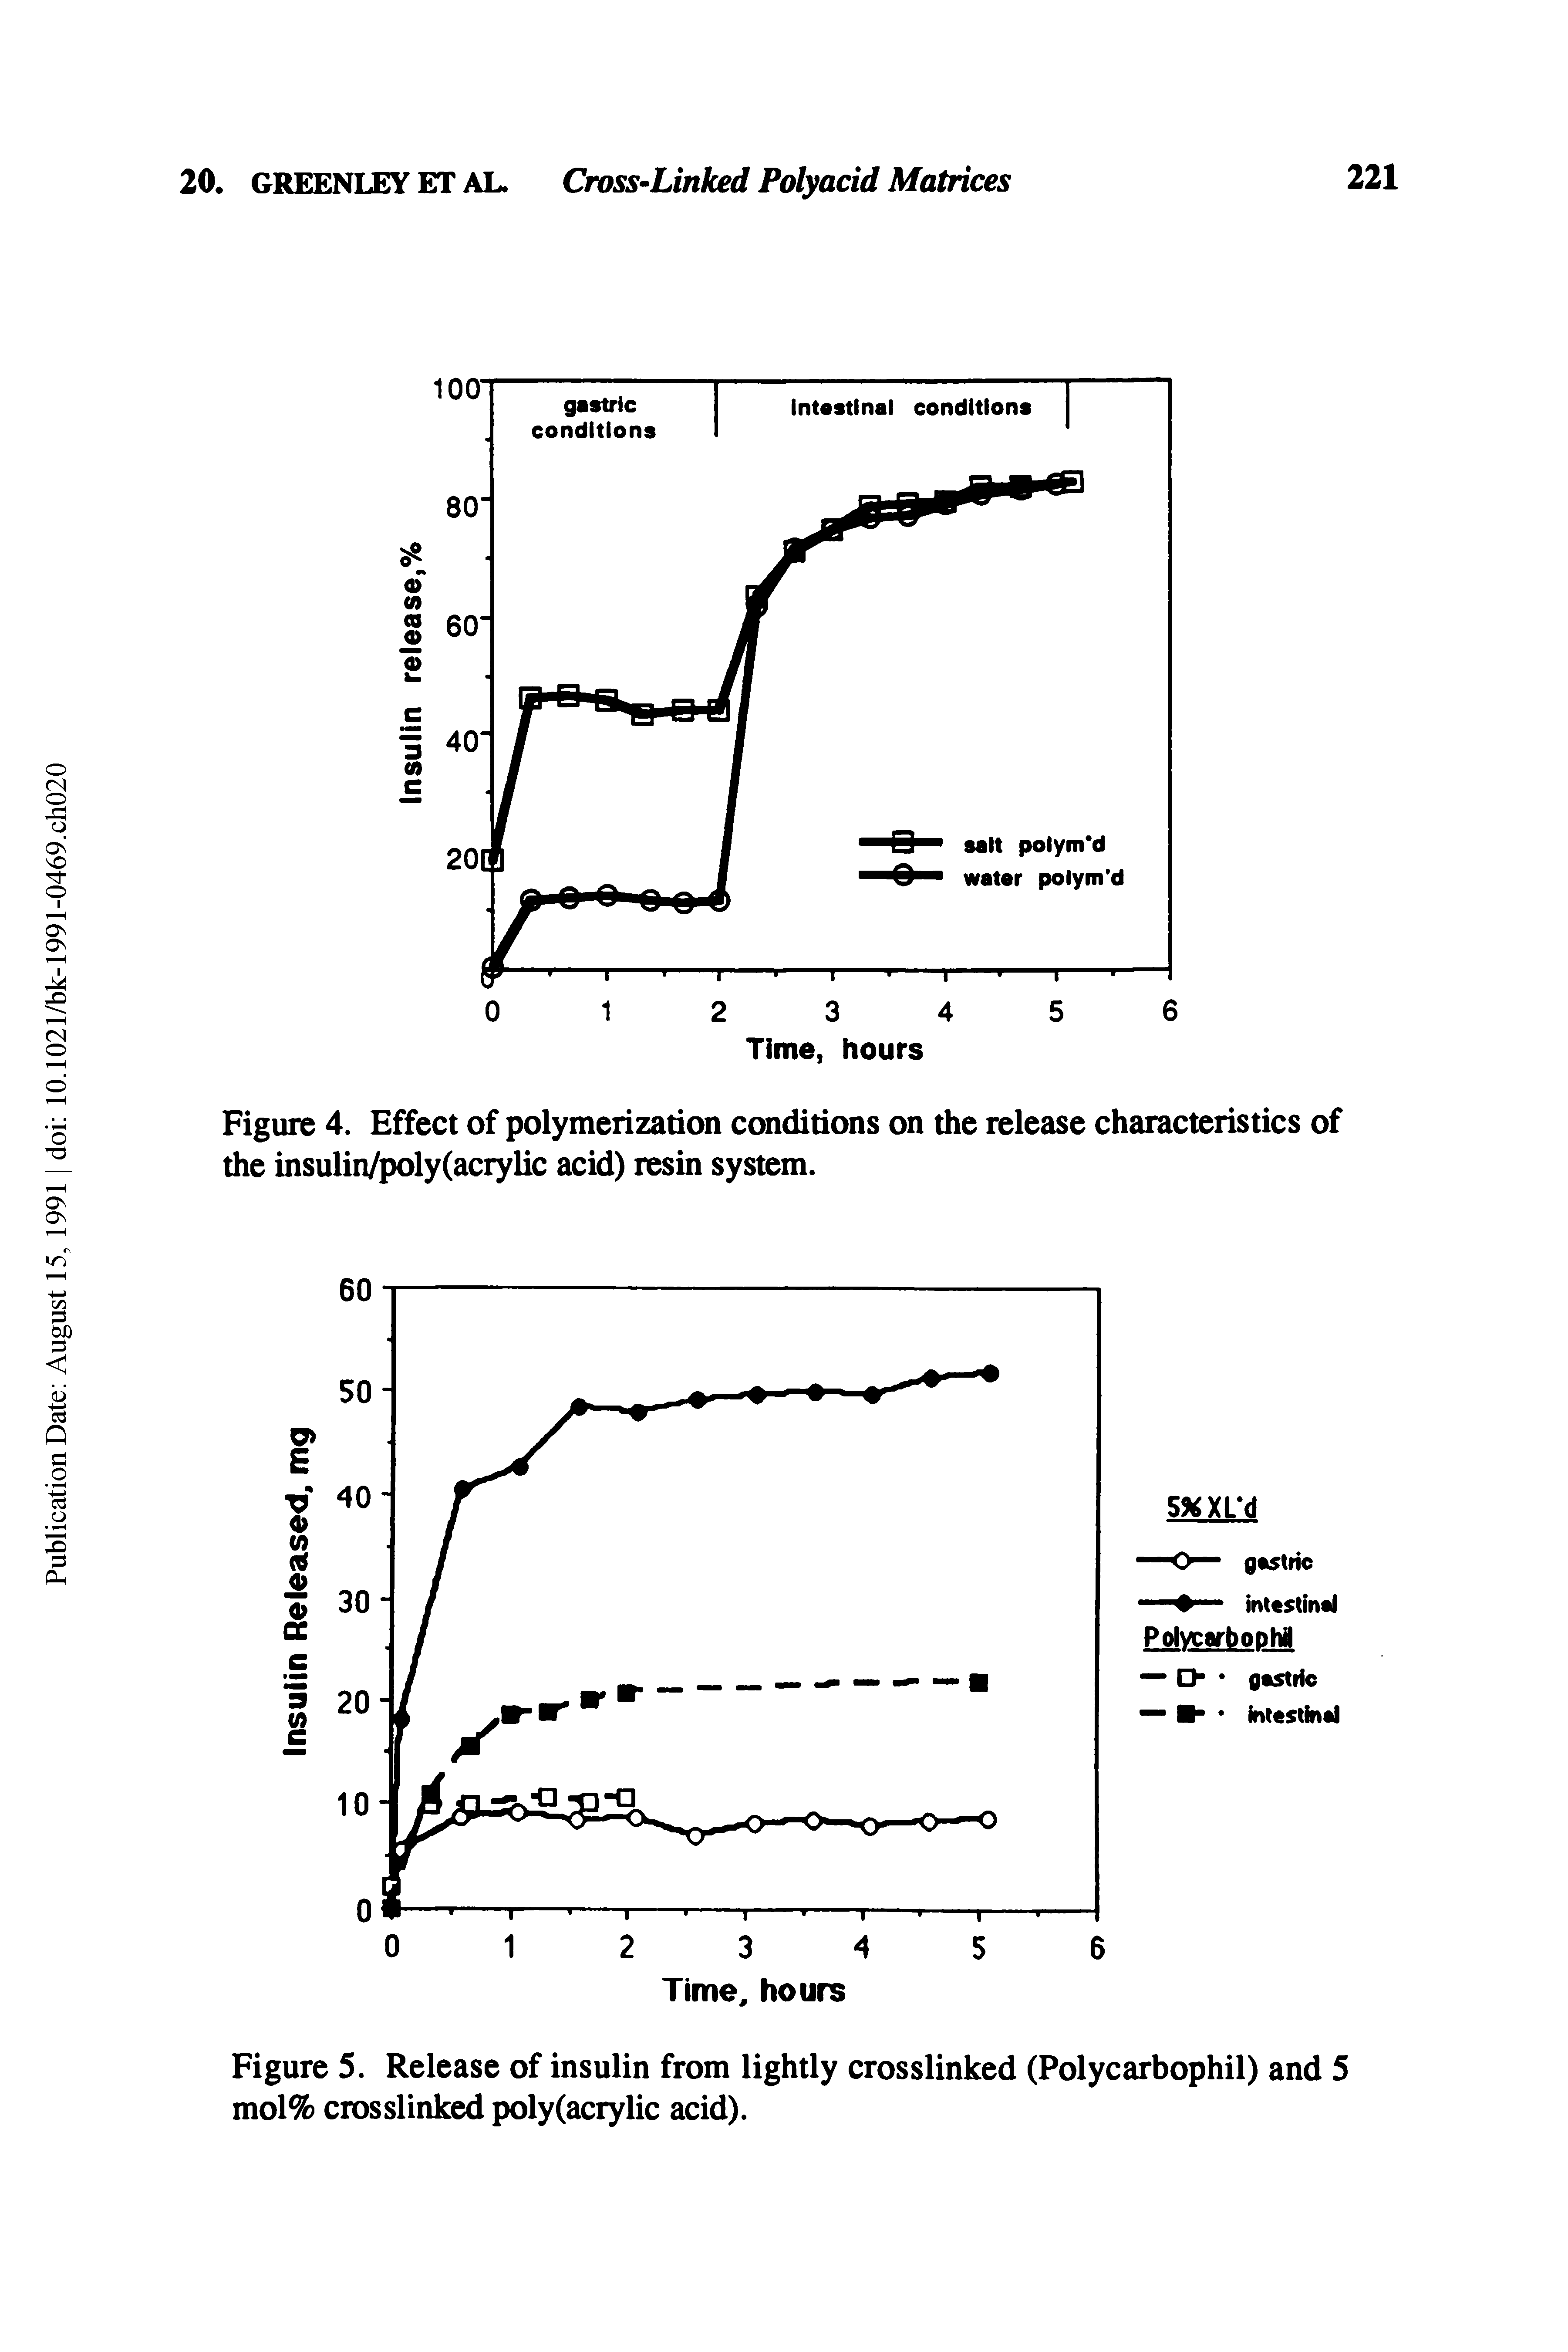 Figure 4. Effect of polymerization conditions on the release characteristics of the insulin/poly(acrylic acid) resin system.